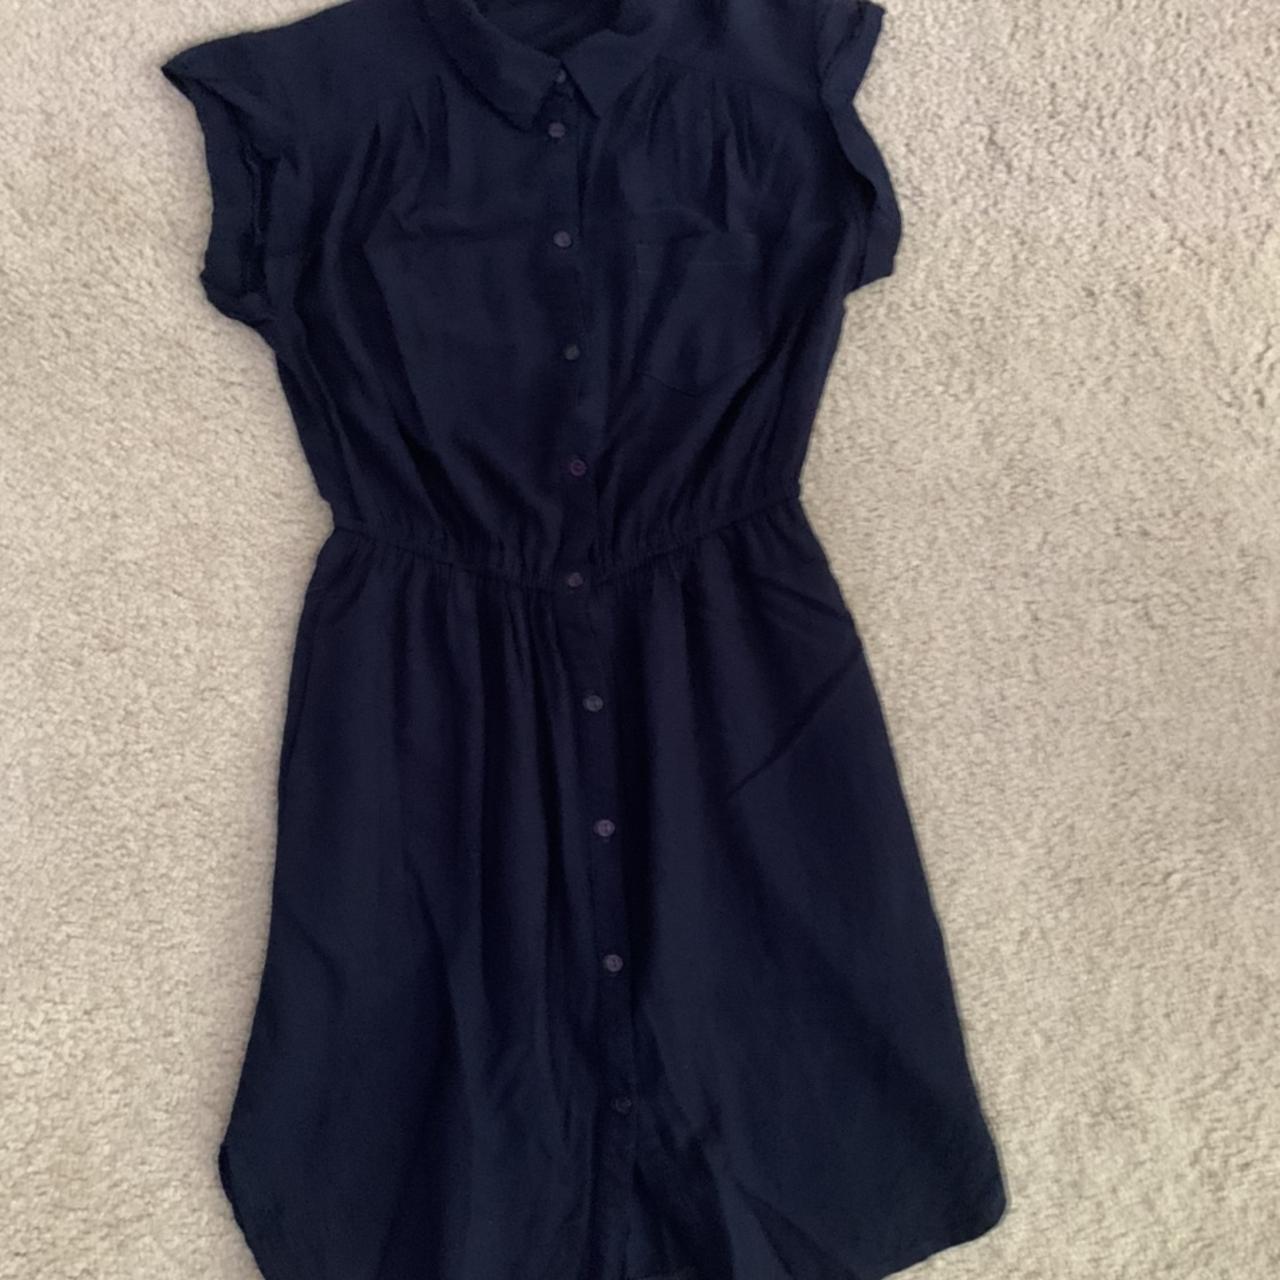 New Look Women's Blue and Navy Dress